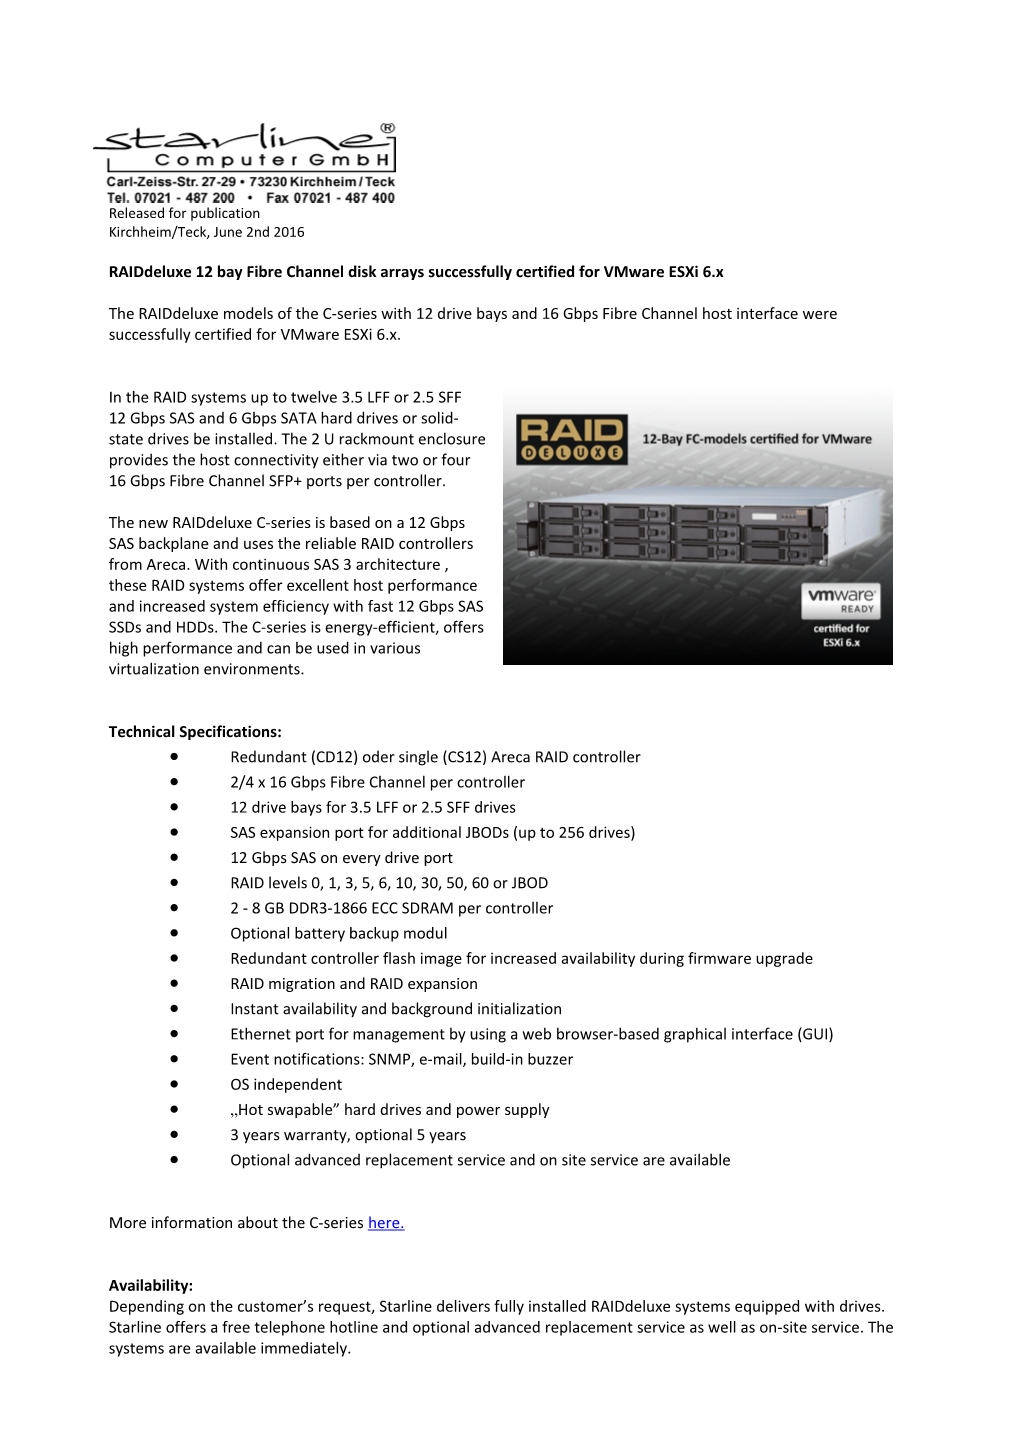 Raiddeluxe 12 Bay Fibre Channel Disk Arrays Successfully Certified for Vmware Esxi 6.X